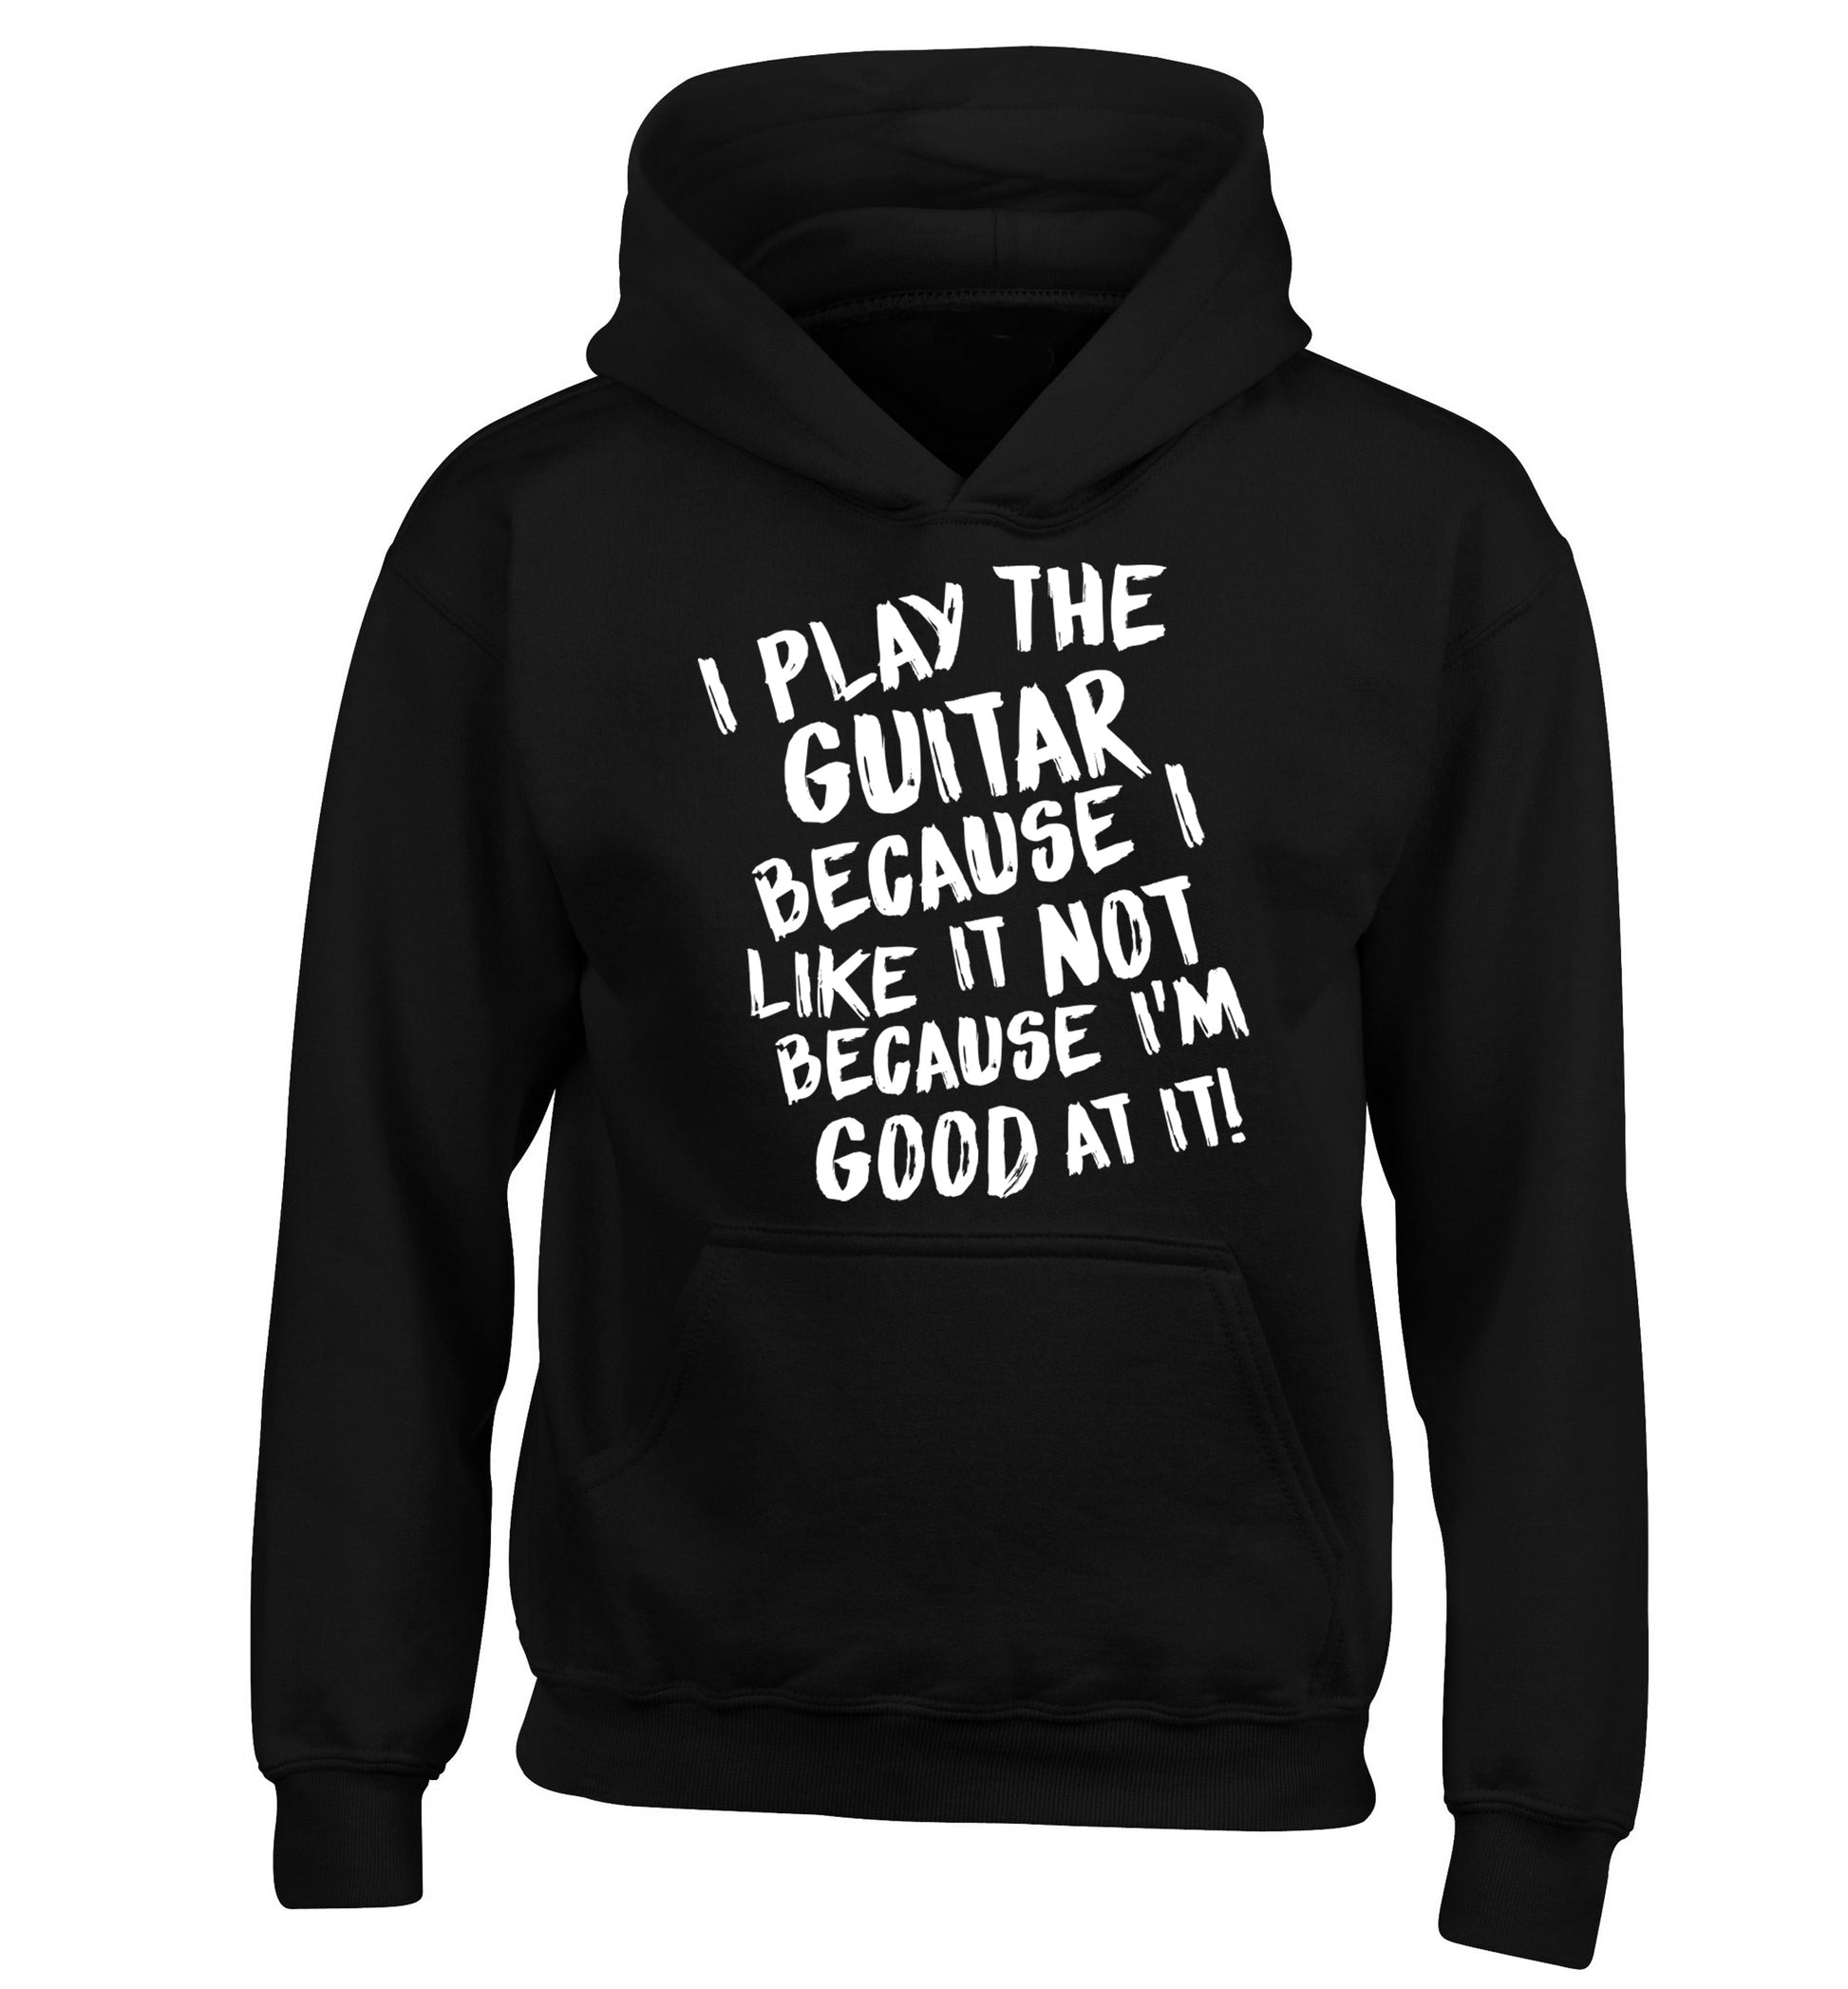 I play the guitar because I like it not because I'm good at it children's black hoodie 12-14 Years